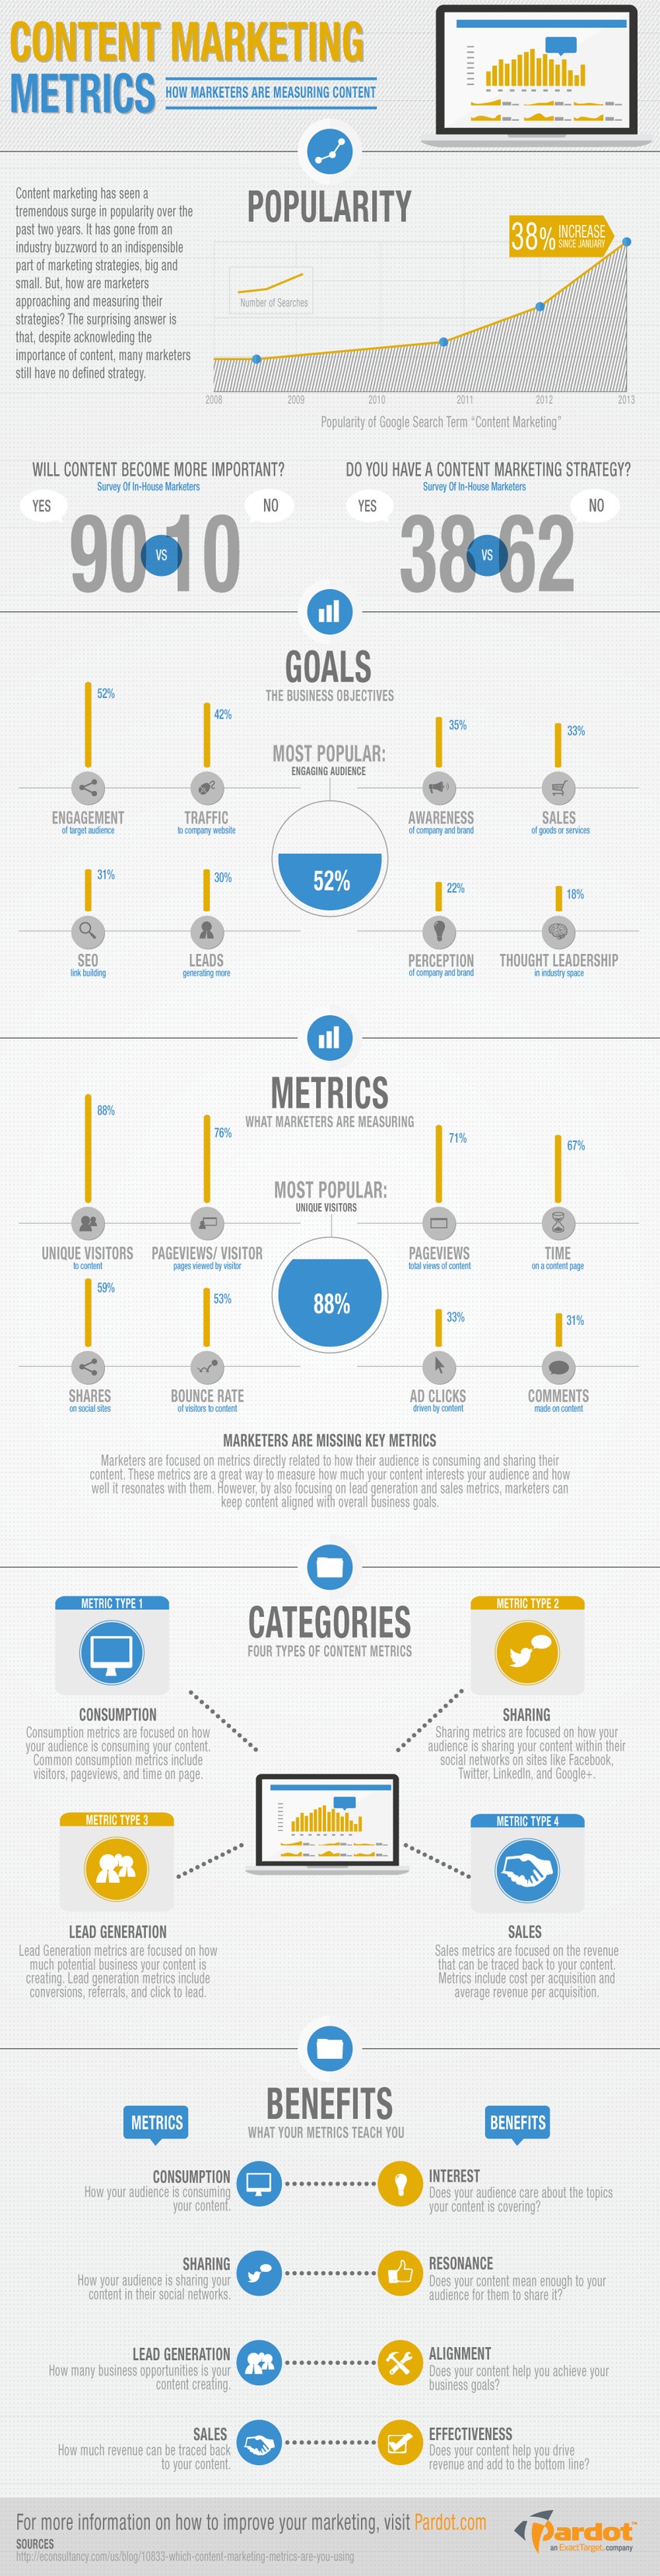 How Marketers Are Measuring Content [INFOGRAPHIC] | The MarTech Digest | Scoop.it